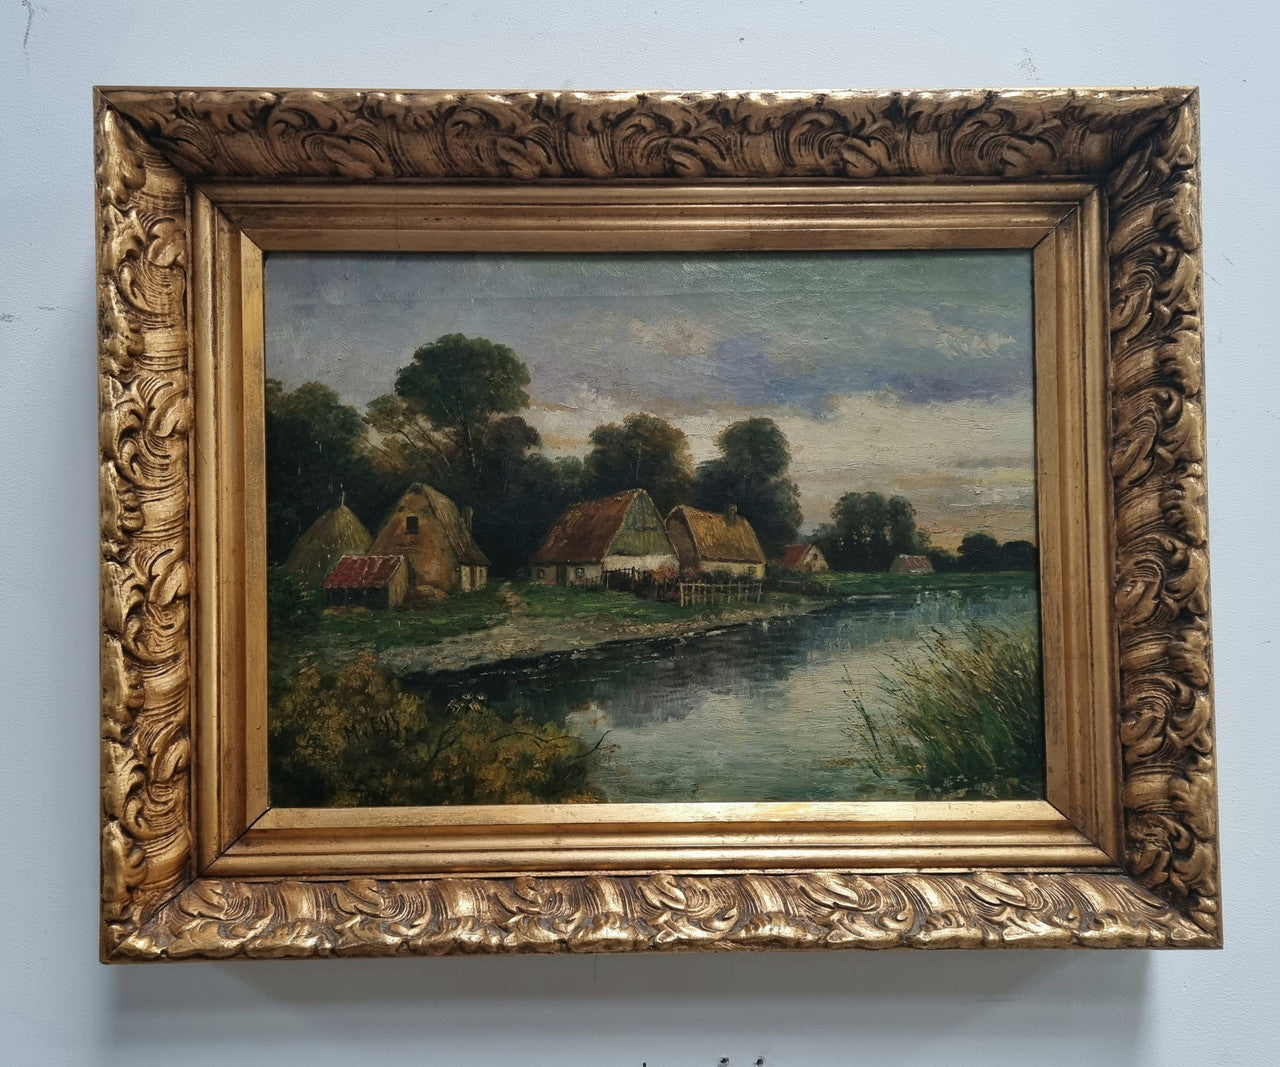 Lovely framed original oil on canvas of a country cottage scene on a river in good original condition